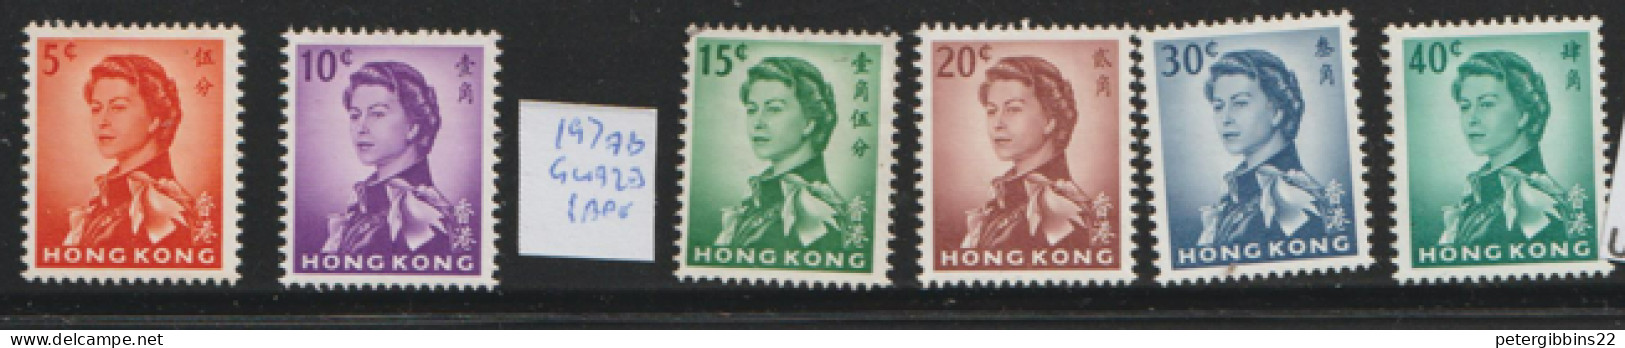 Hong Kong 1962 Definitives  Various Valus  Wmk  Upright  Mounted Mint - Nuovi